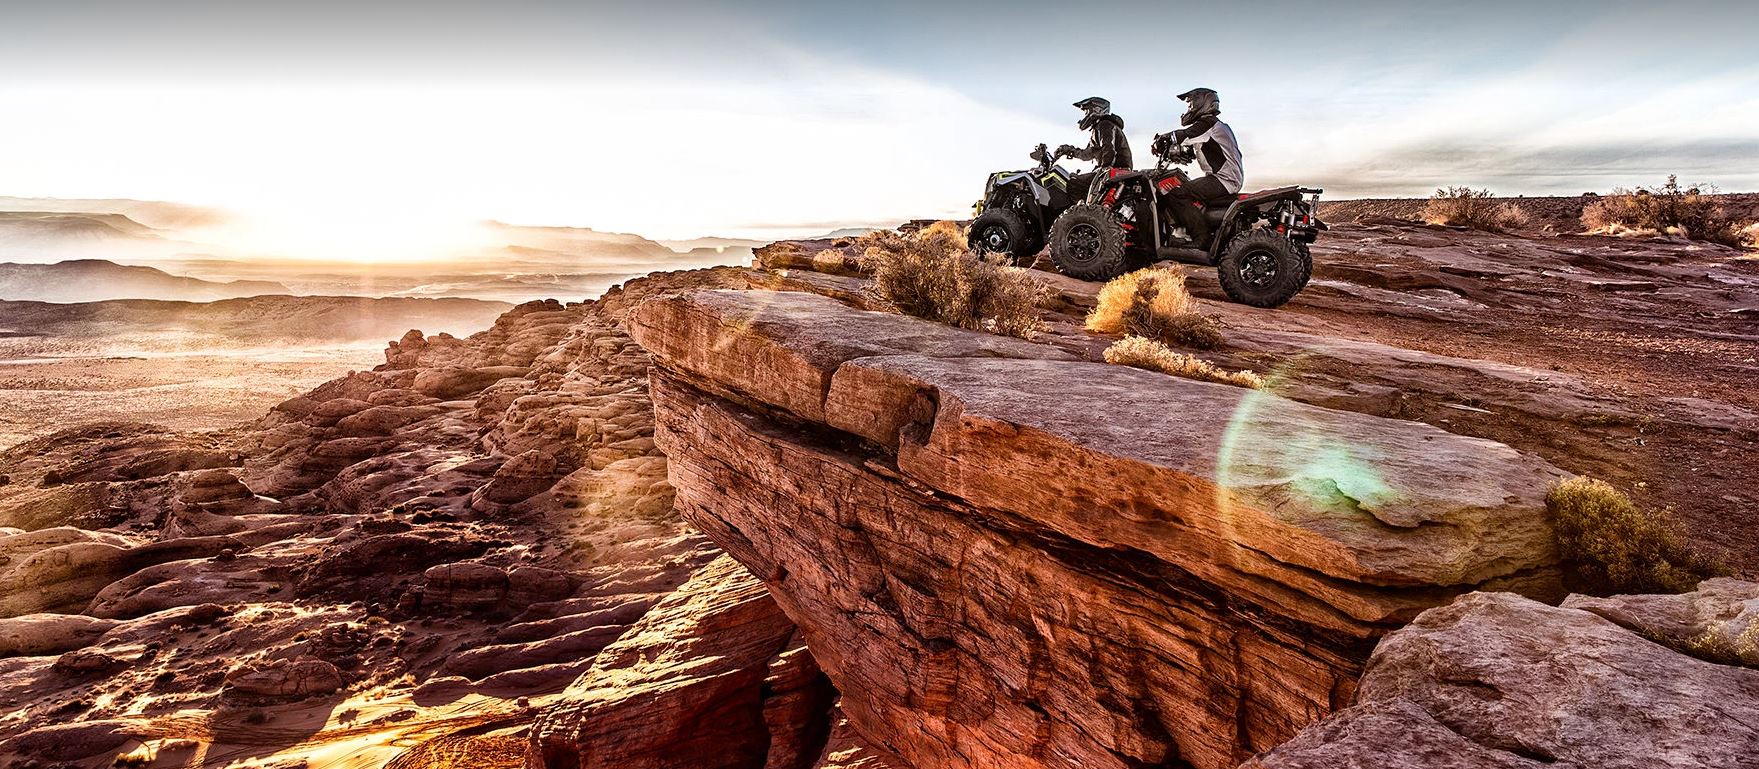 two Polaris Scrambler XP 10000 S ATV riders parked at the edge of a cliff watching the sunrise